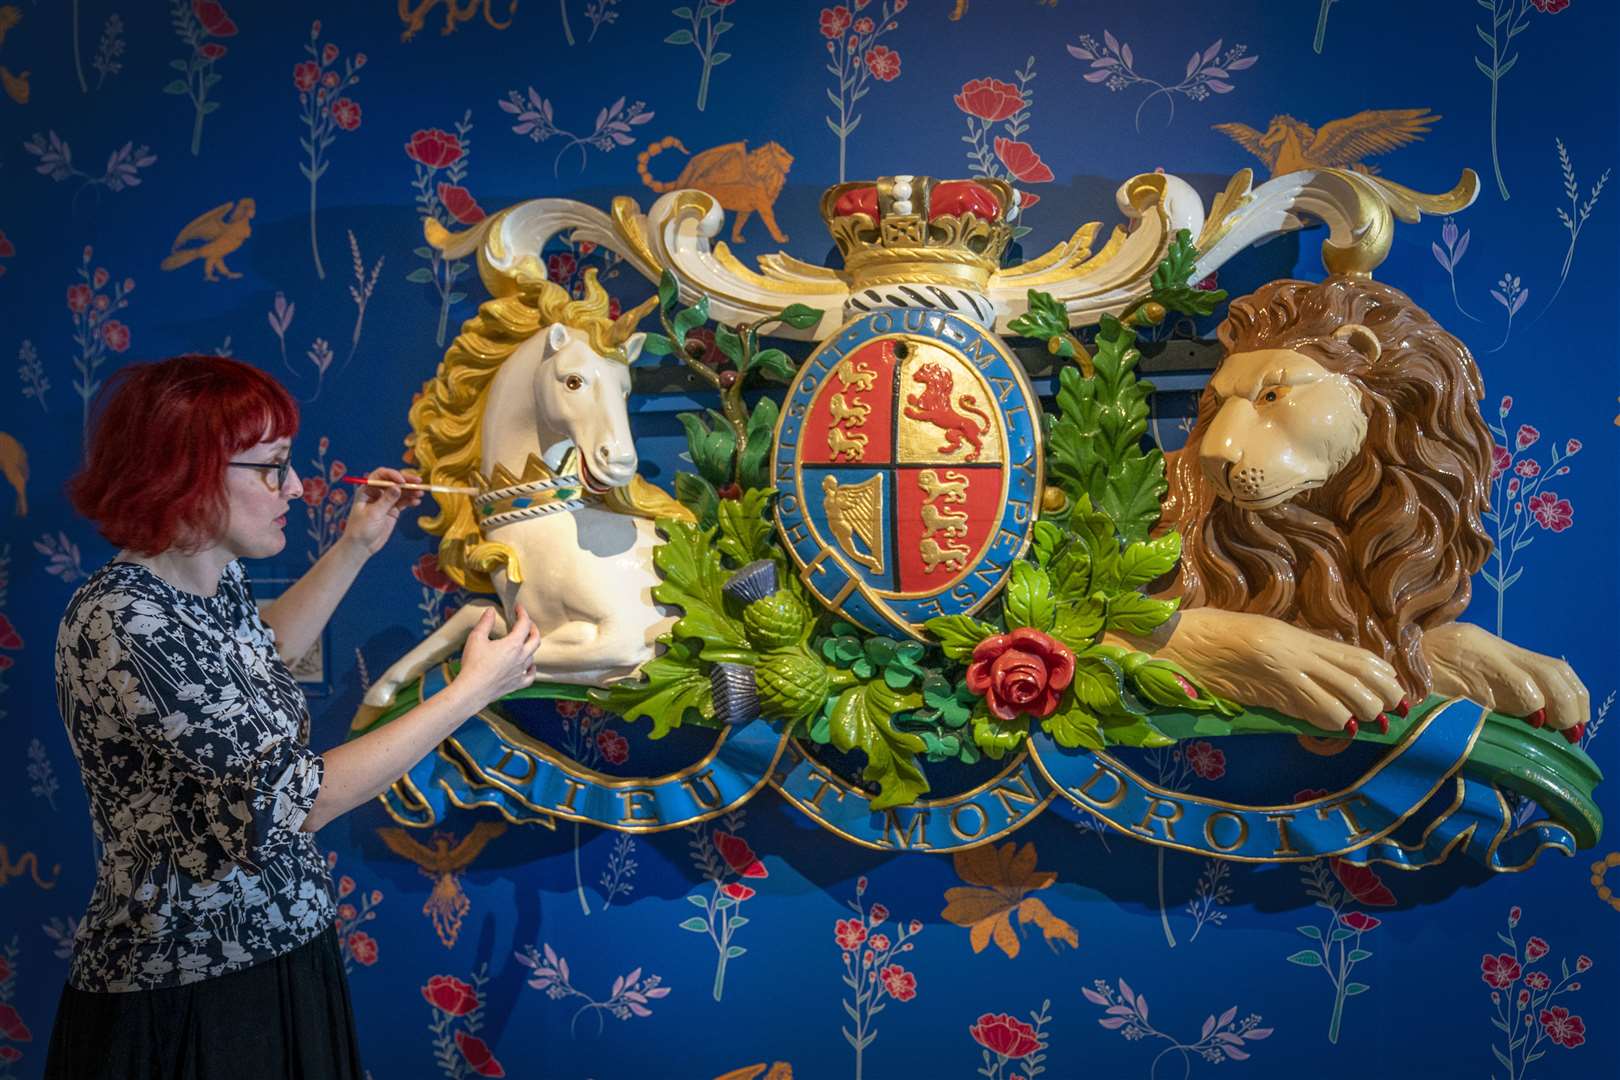 Conservation officer Anna Zwagerman cleans Queen Victoria’s Coat of Arms plaque (1848), which is on display at the museum (Jane Barlow/PA)